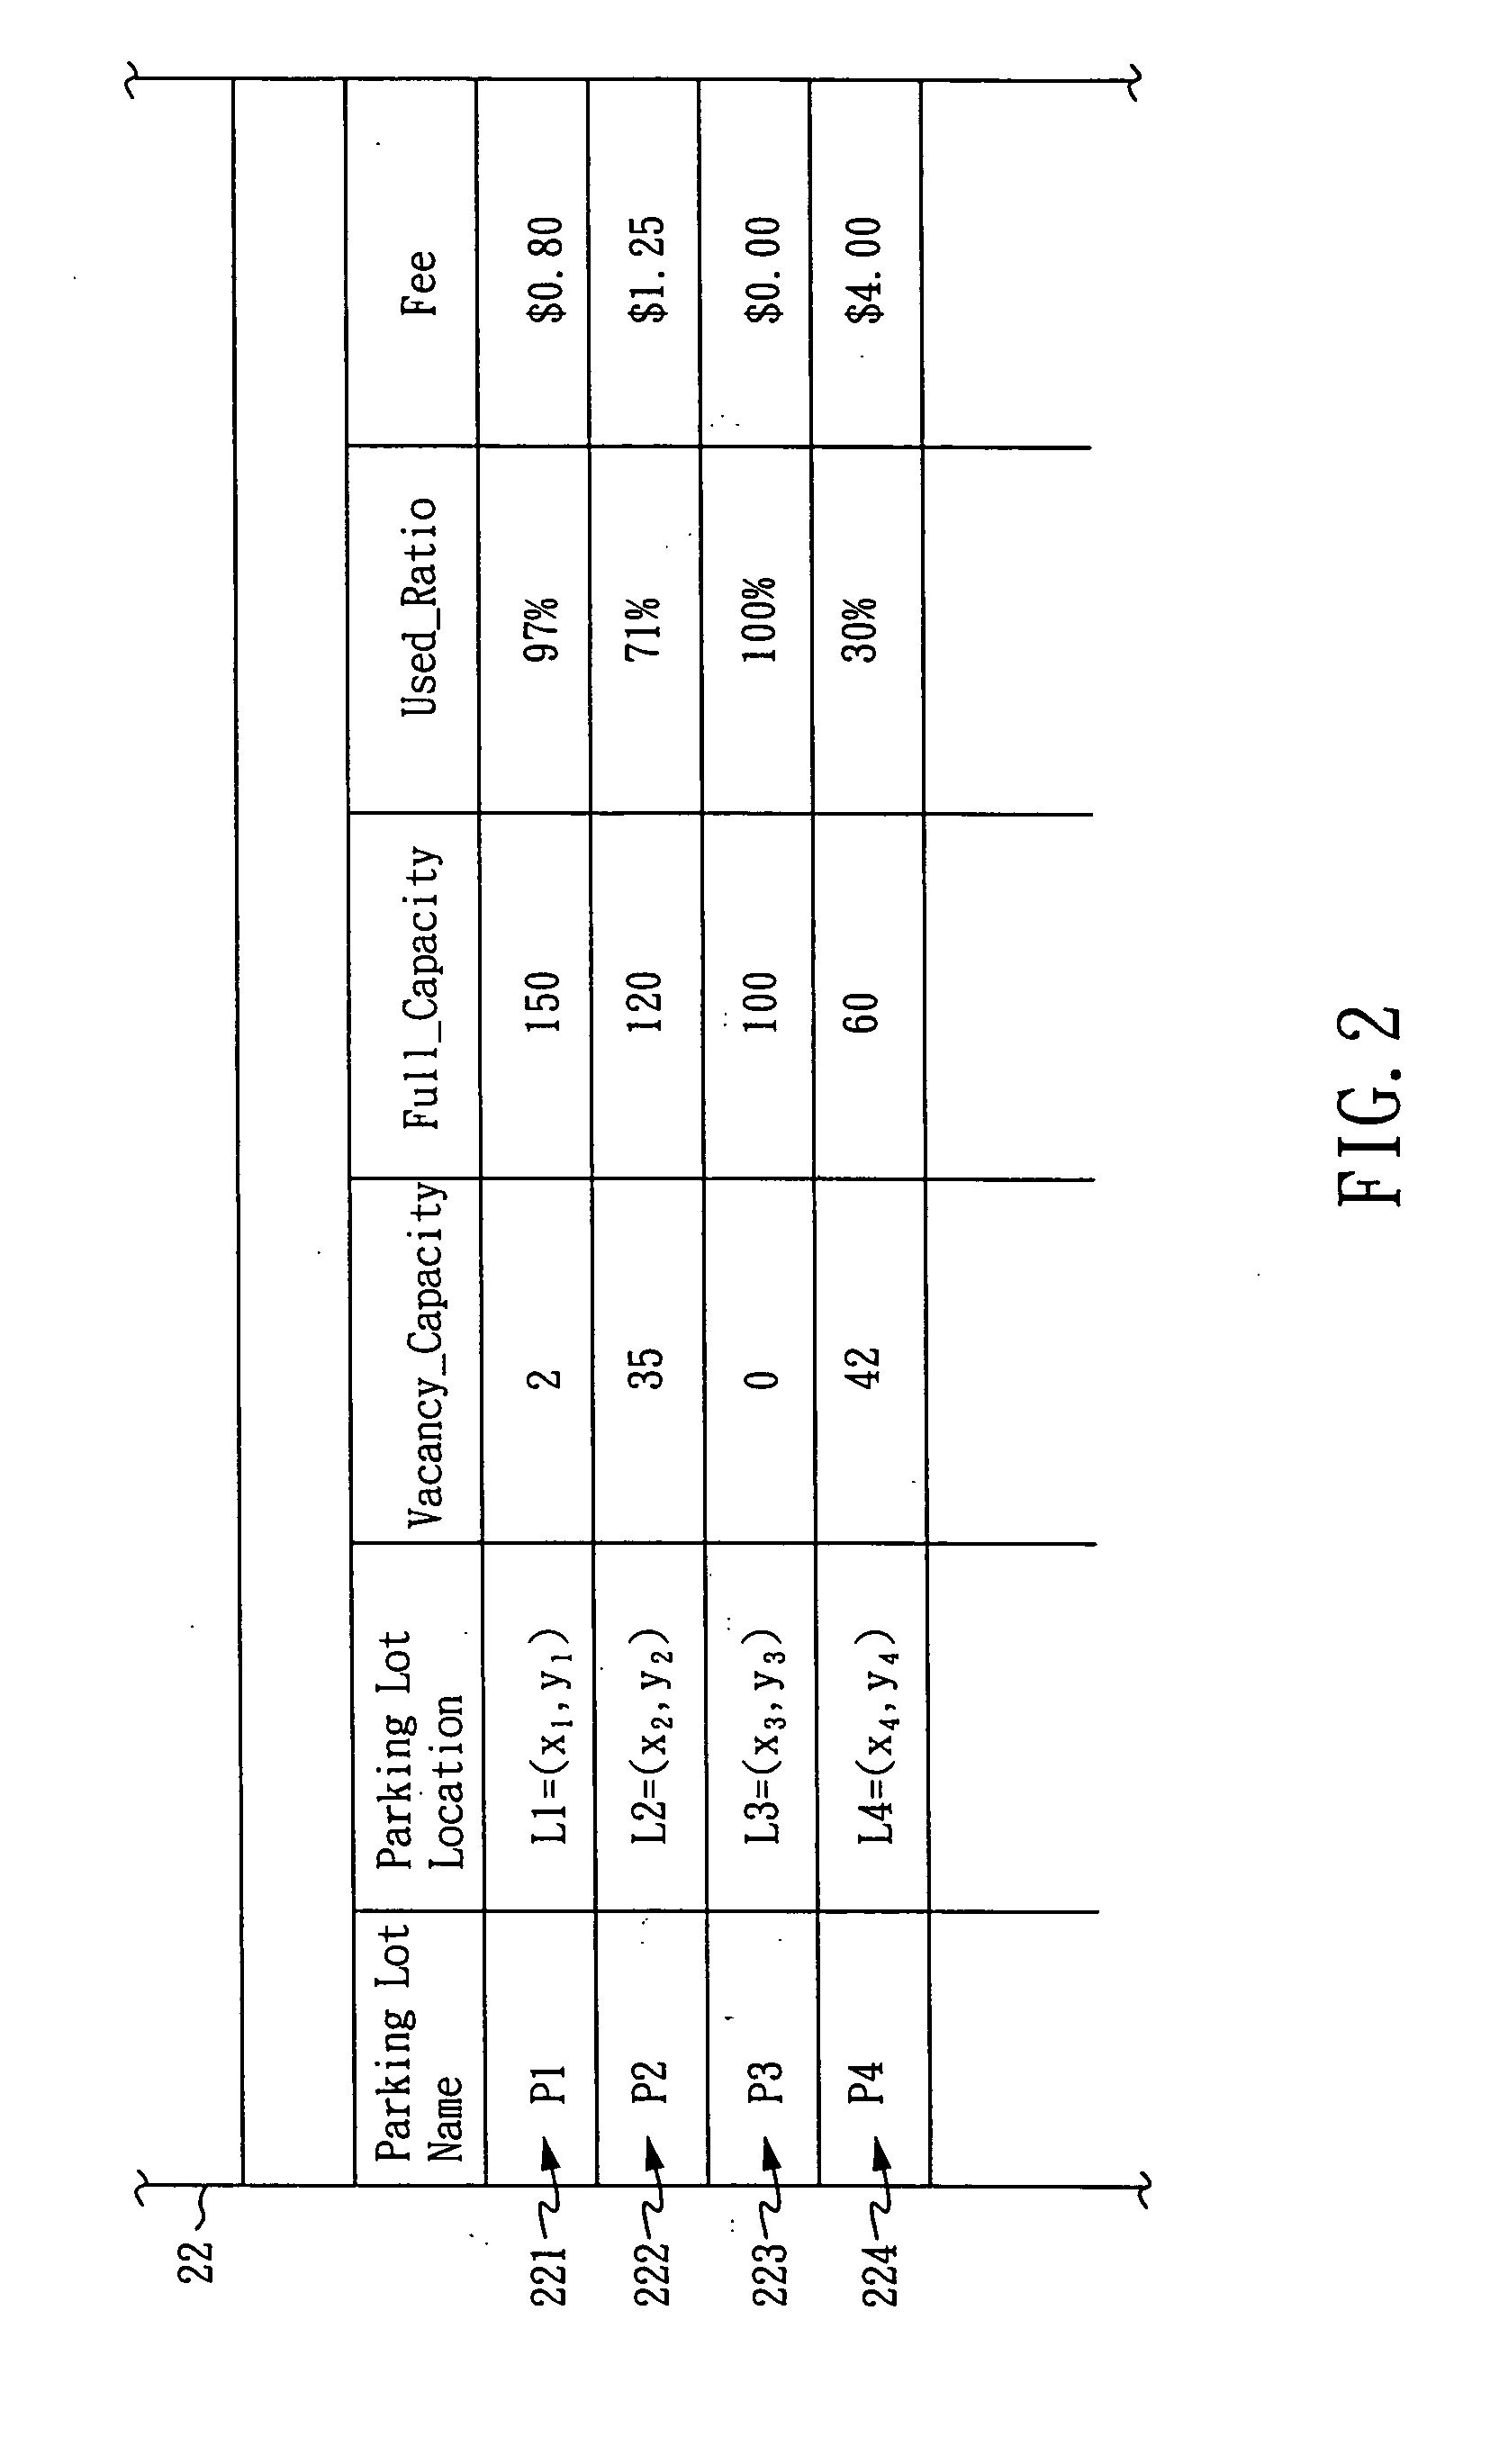 Parking lot reservation system with electronic identification